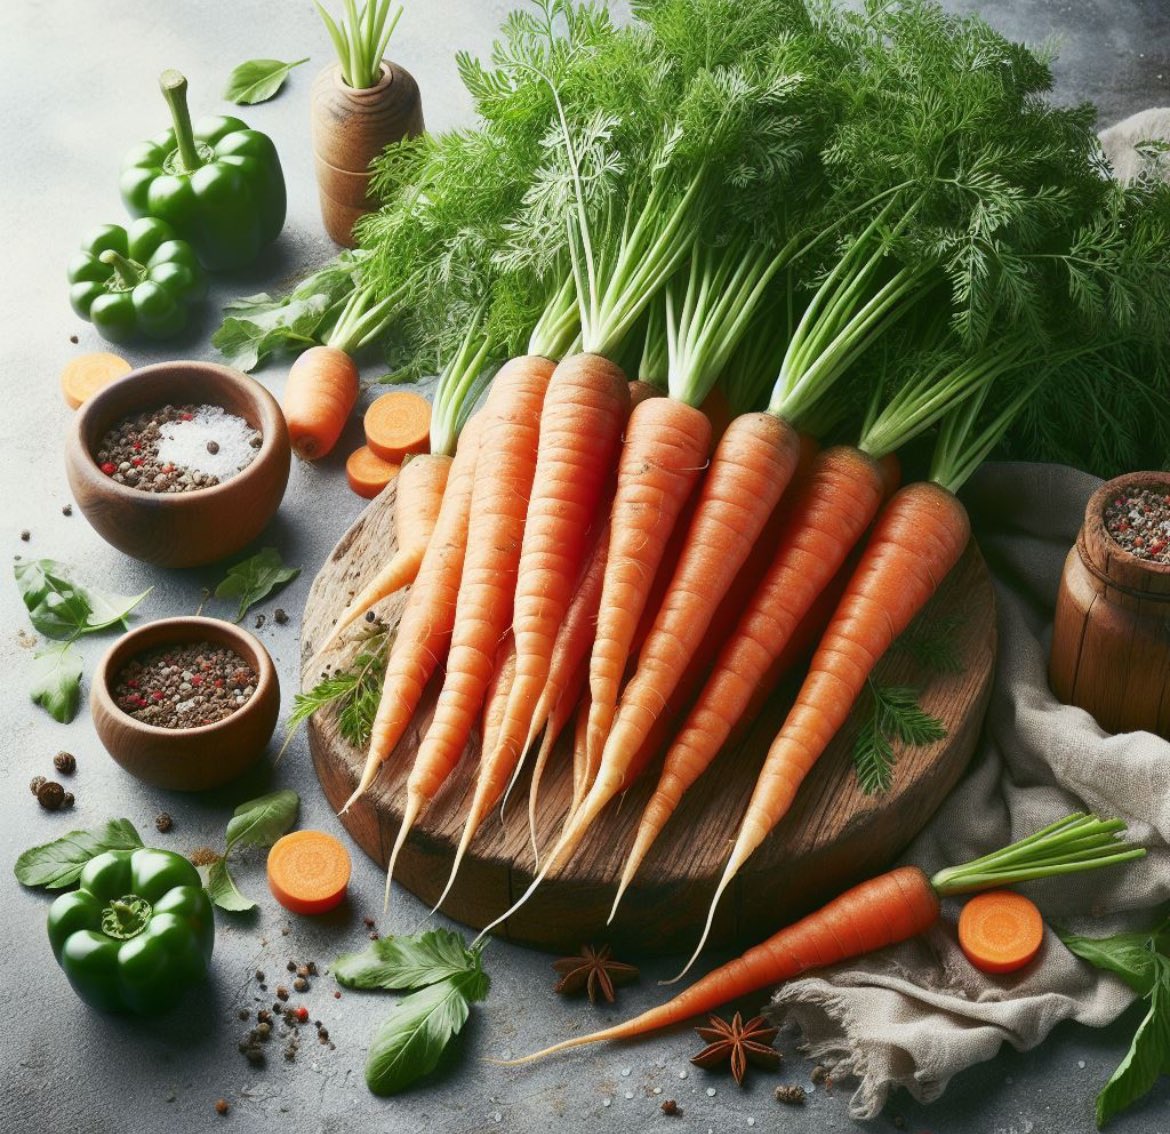 🥕 Honey-Glazed Carrots: Slice carrots, sauté in butter until tender. Add 2 tbsp honey & a squeeze of lemon juice, cook until glazed. Sprinkle with parsley & enjoy! #QuickRecipe #HealthyEating 🍋🌿